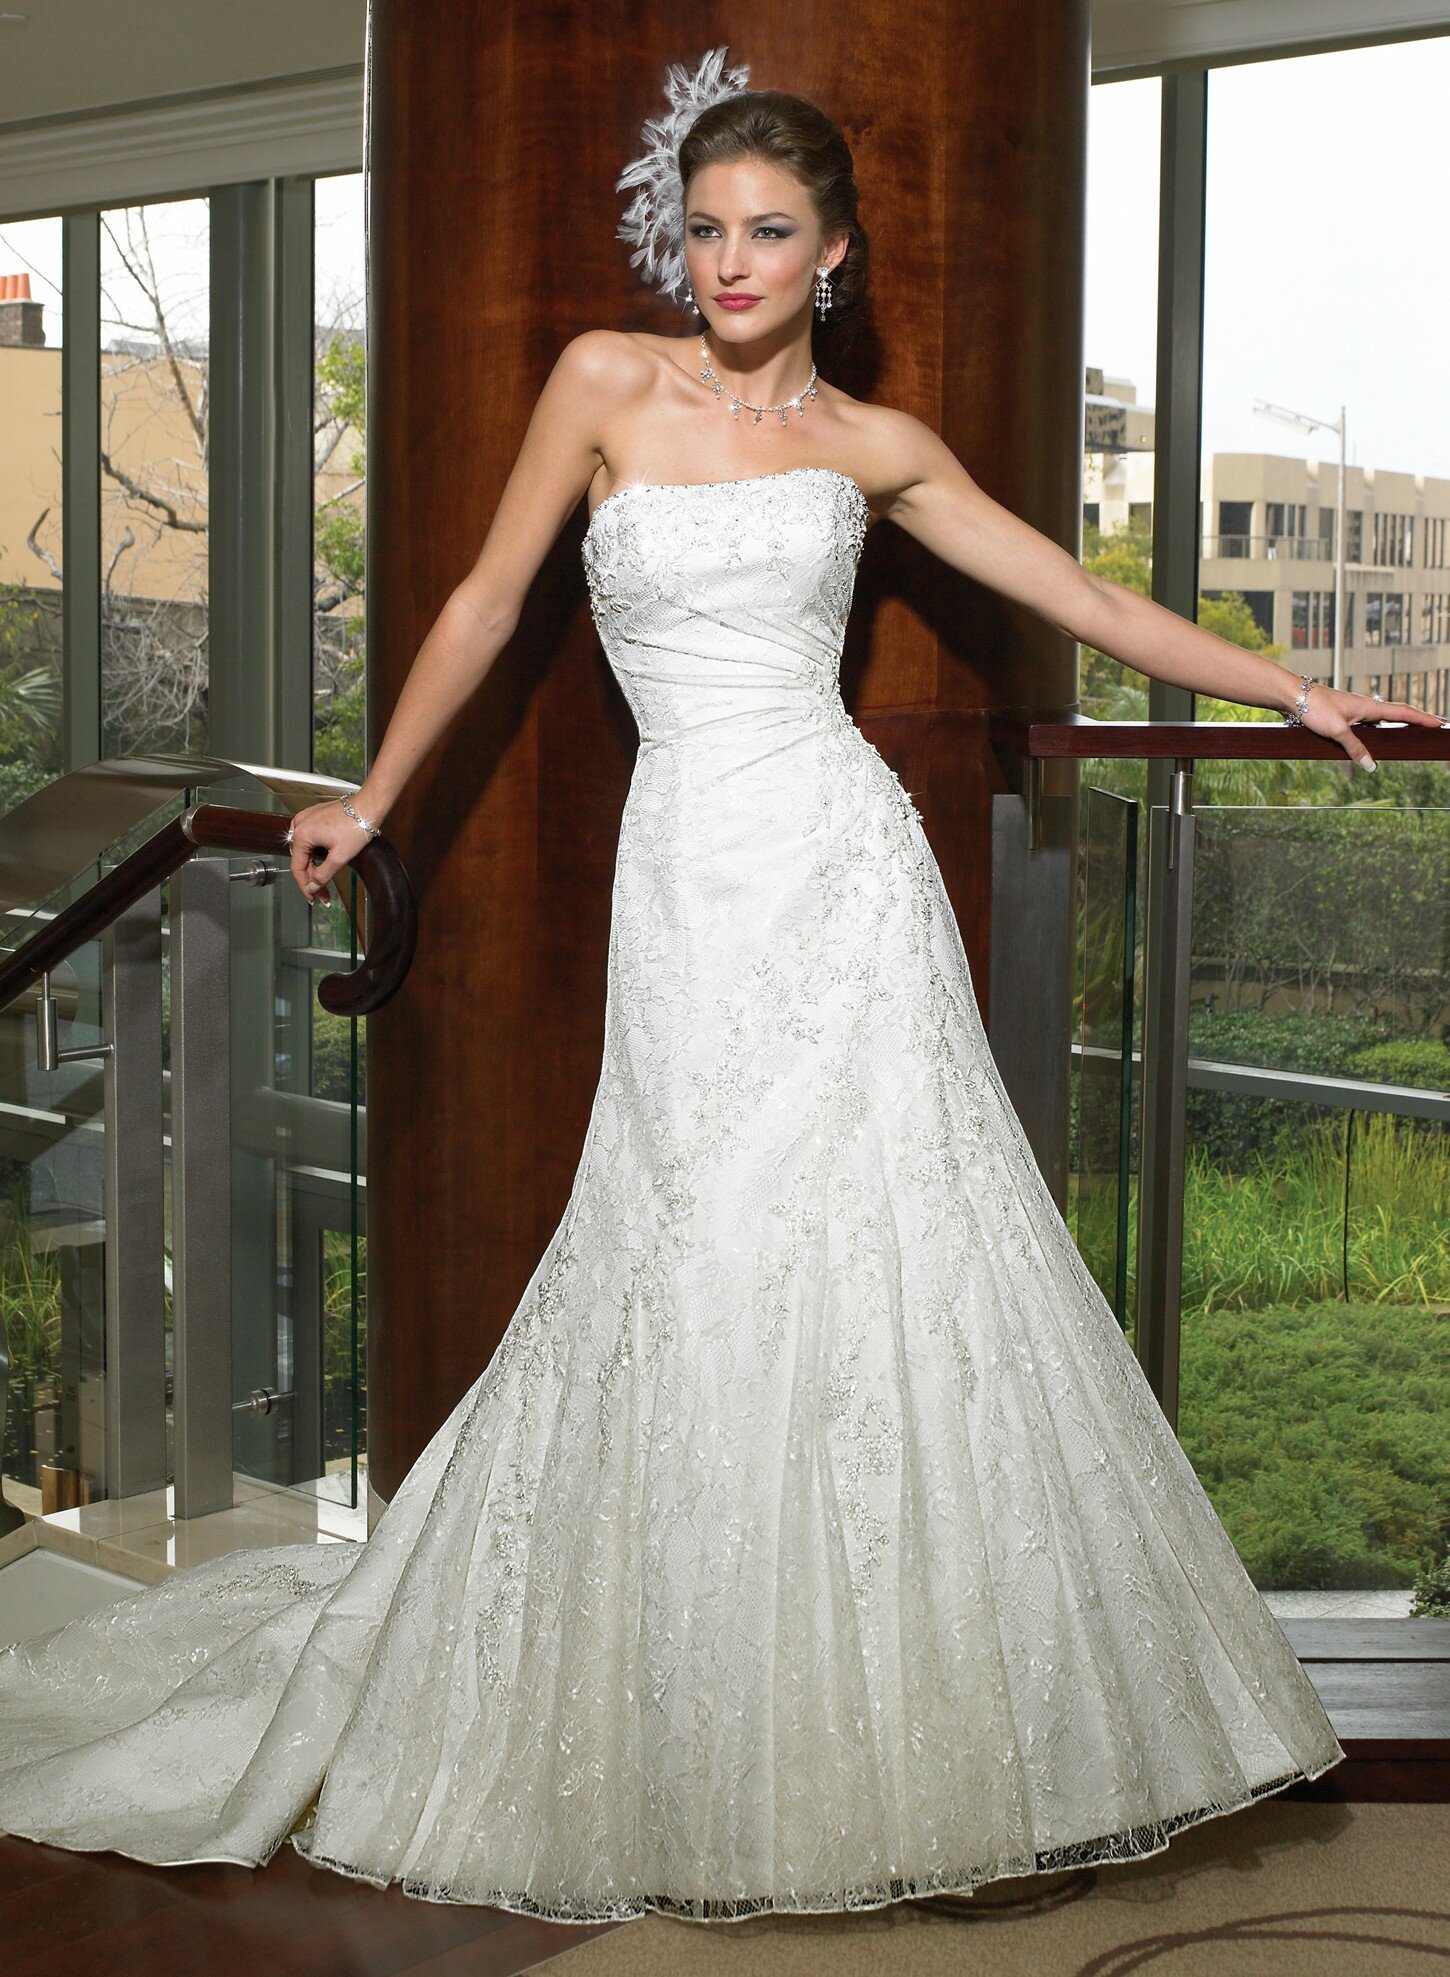 Wedding dresses with lace straps Photo - 6